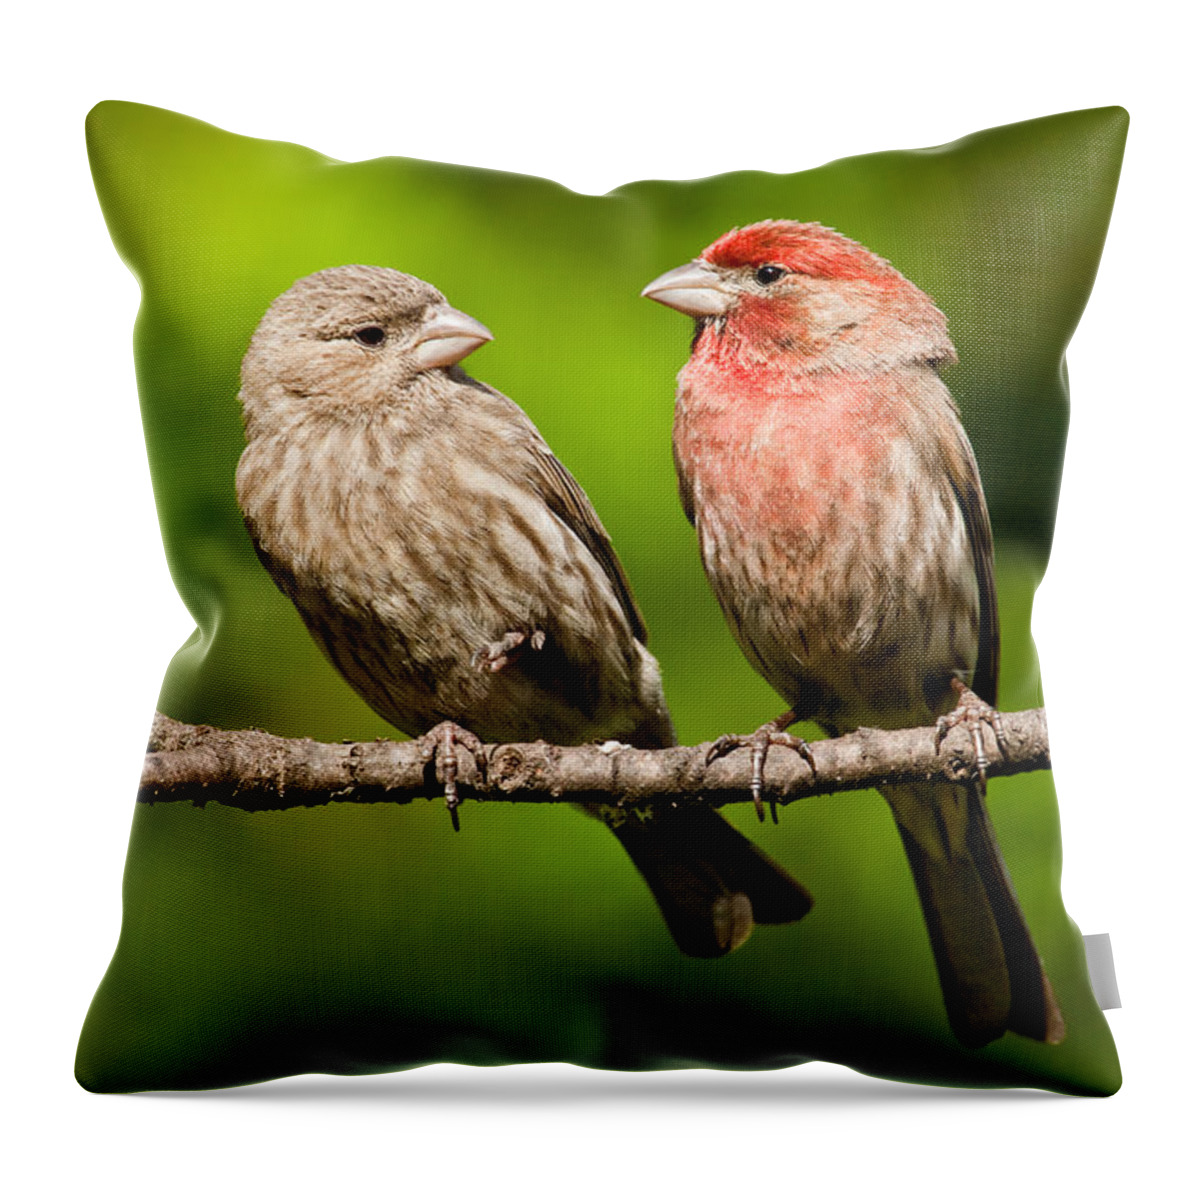 Affectionate Throw Pillow featuring the photograph Pair of House Finches in a Tree by Jeff Goulden